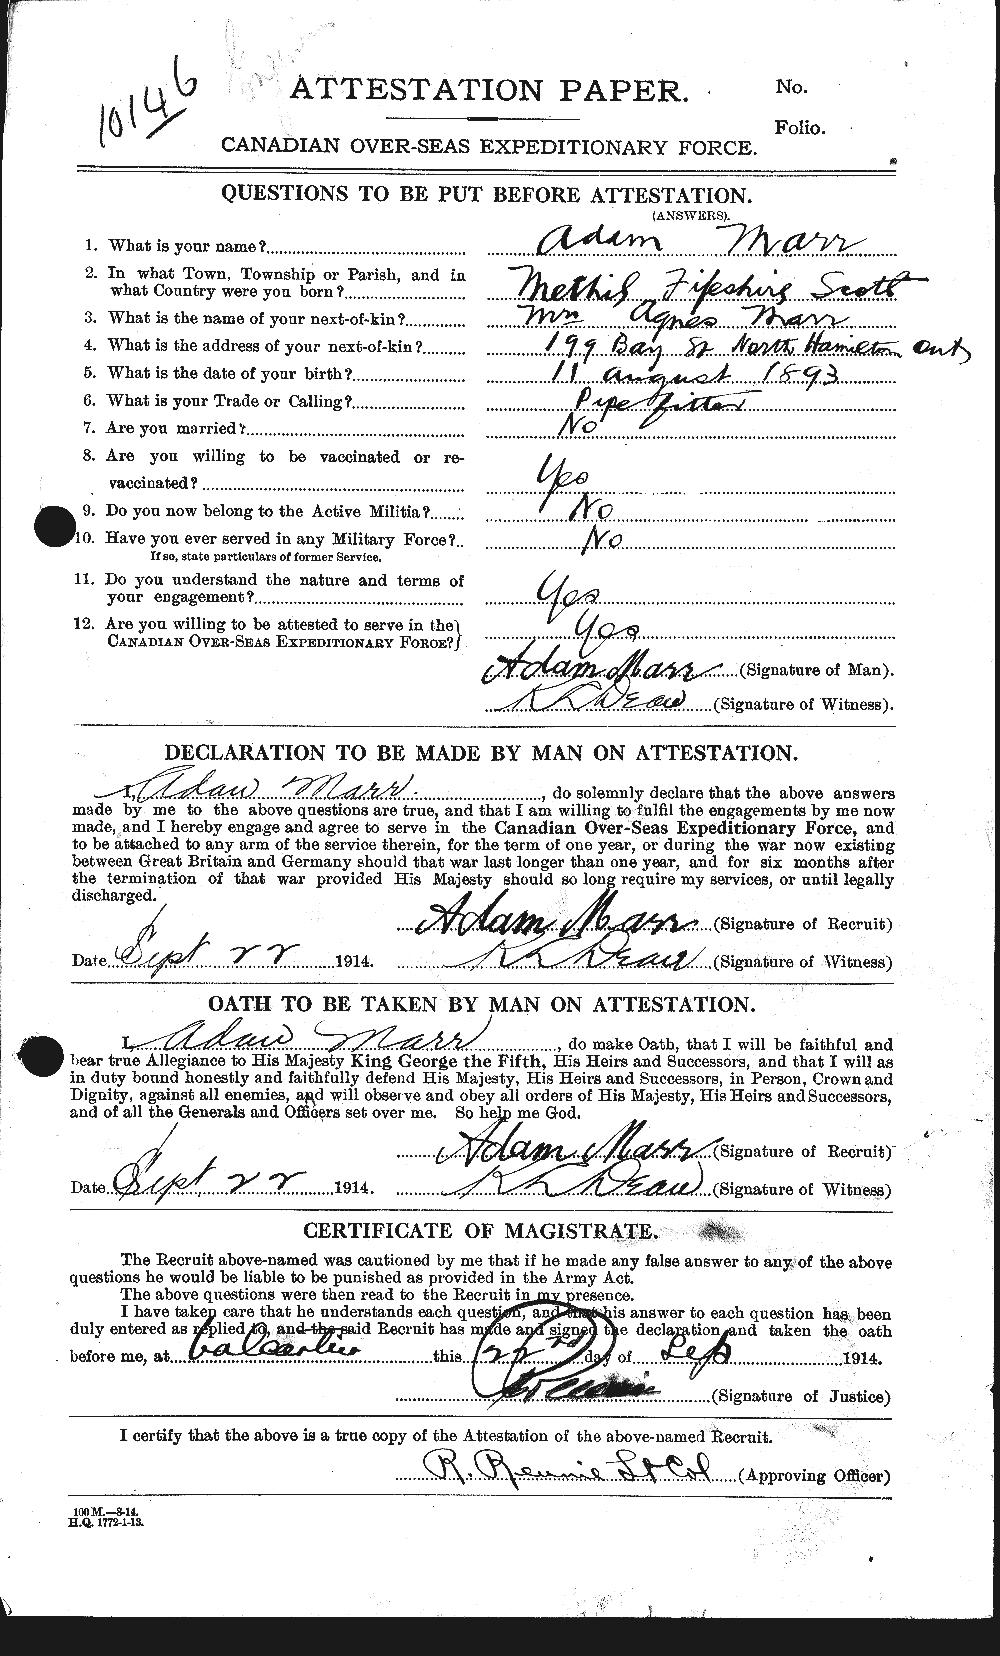 Personnel Records of the First World War - CEF 485582a